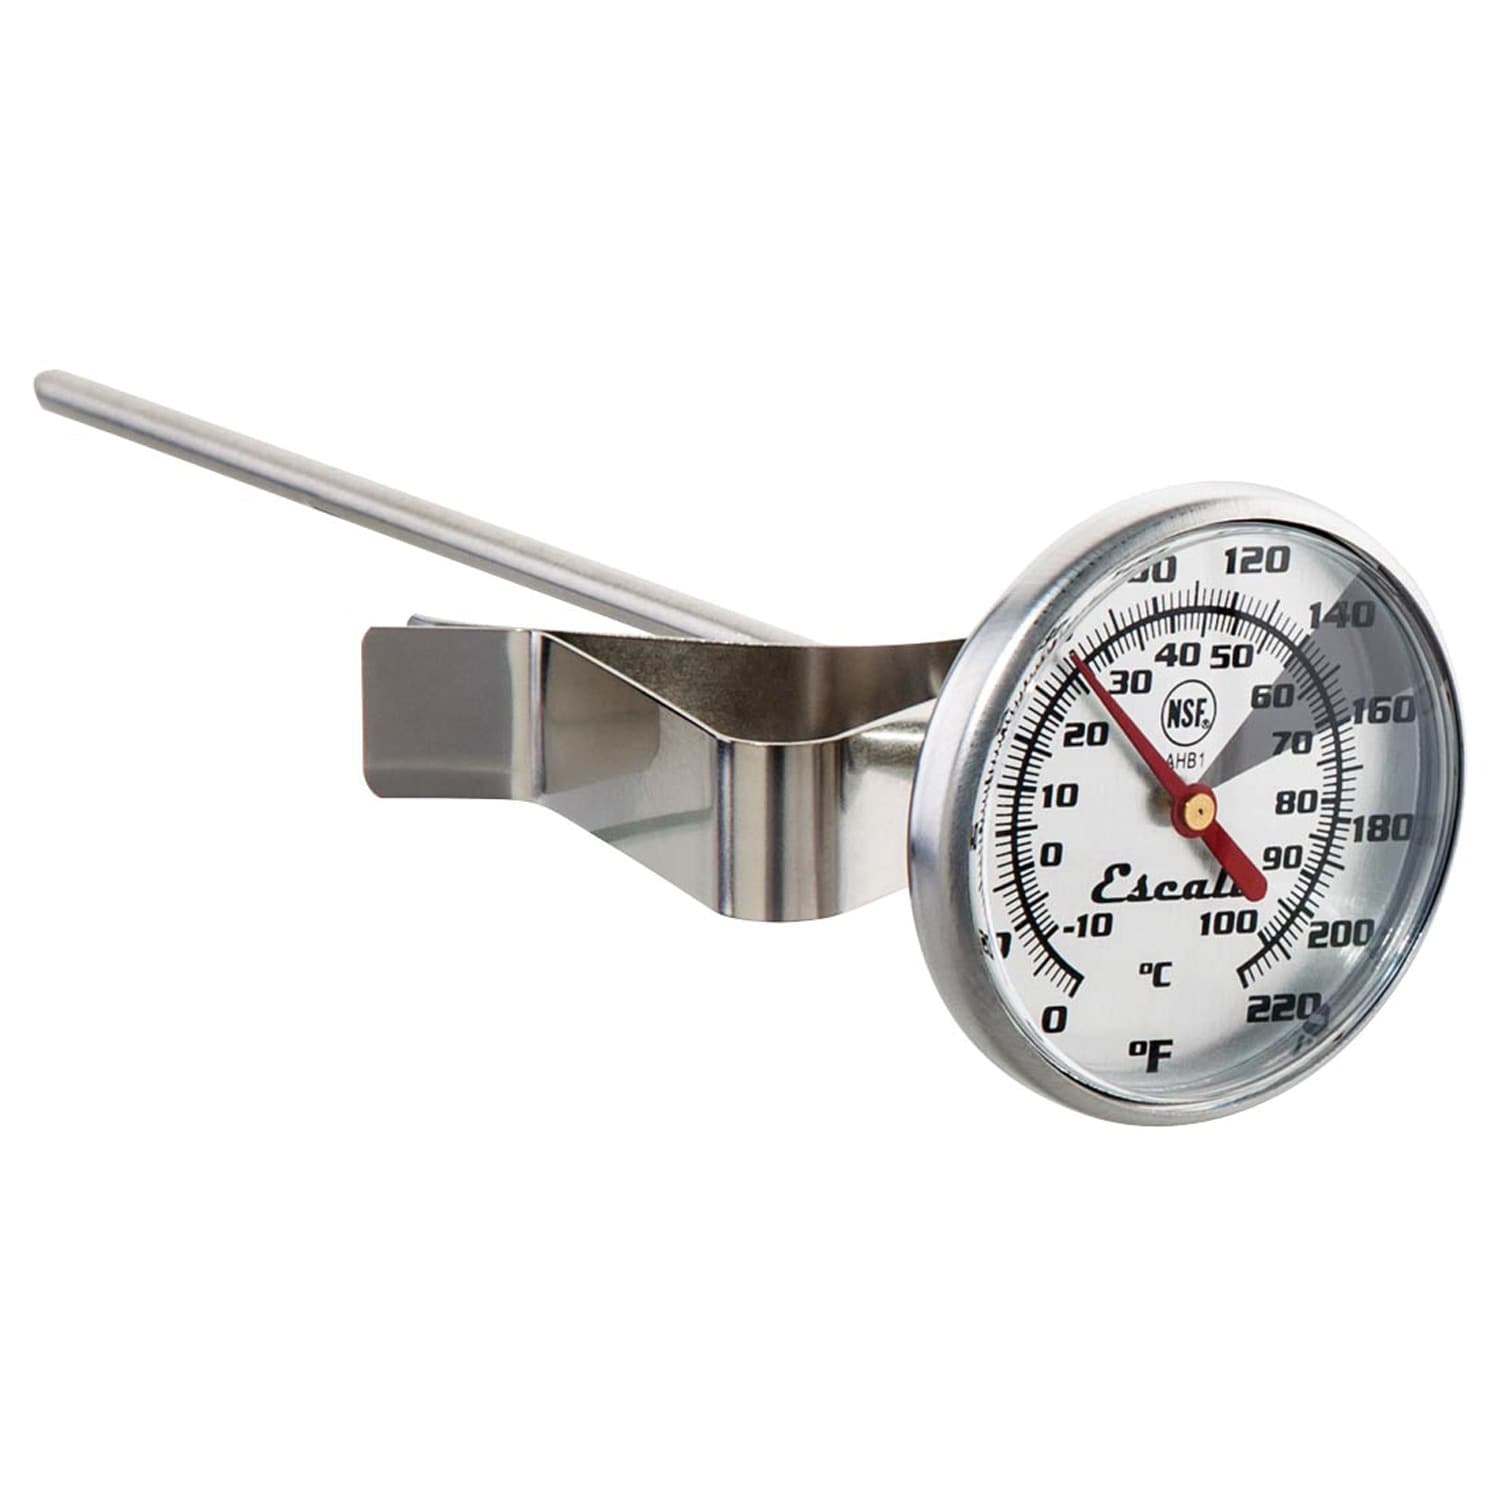 Escali Digital Oven Thermometer & Reviews